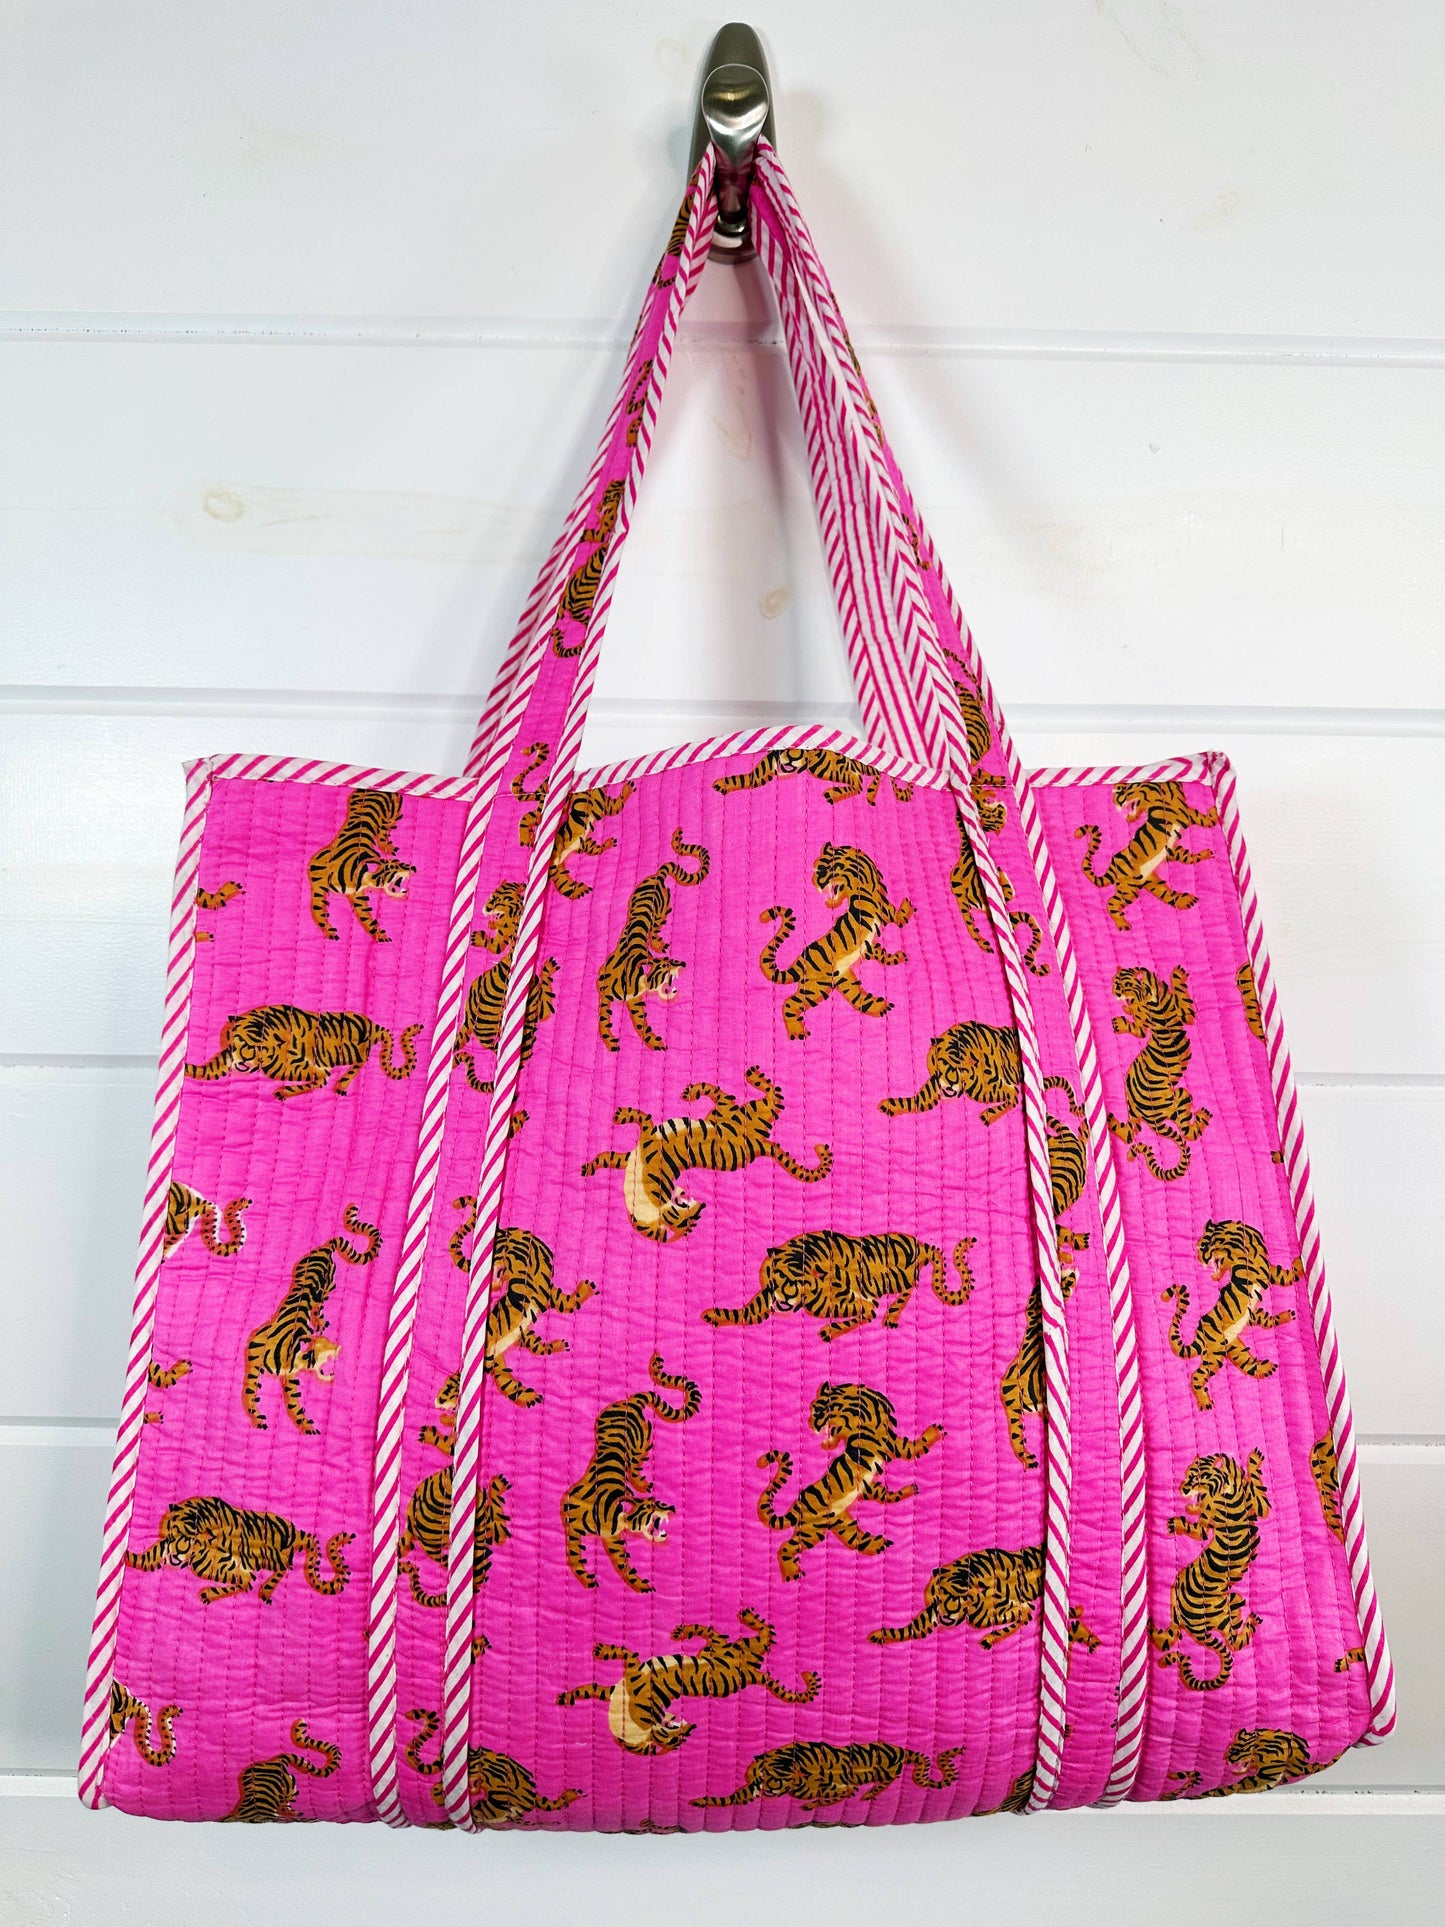 Cotton Quilted Large Shopping Tote Bag - Bright Pink Tigers